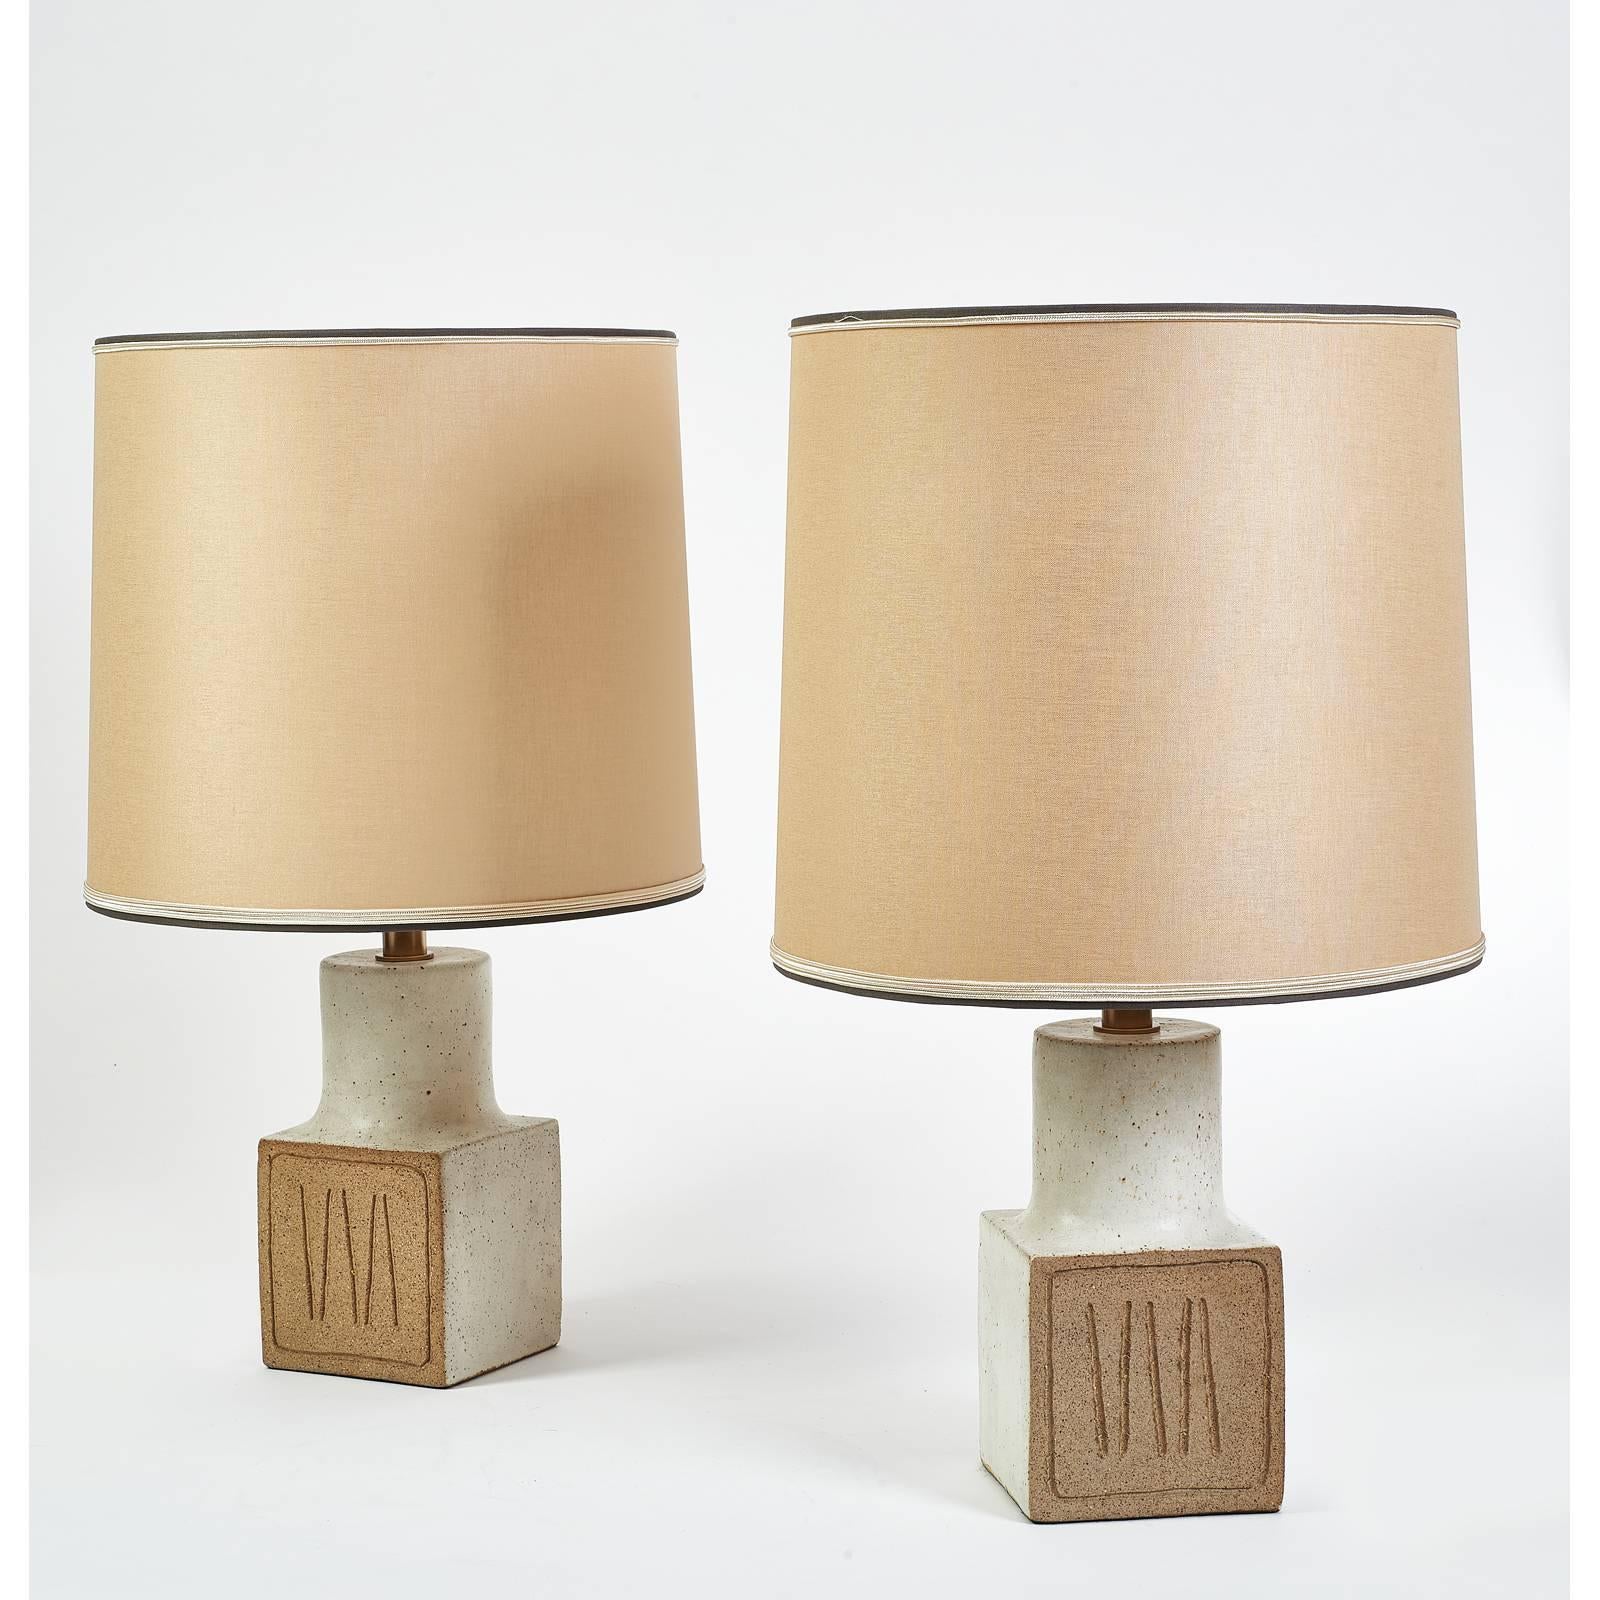 Bruno Gambone (b. 1936).
Pair of glazed and raw ceramic table lamps with etched geometric decor.
Italy, 1970s.
Rewired for use in the USA.
Dimensions: 20 H x 12 diameter.



   